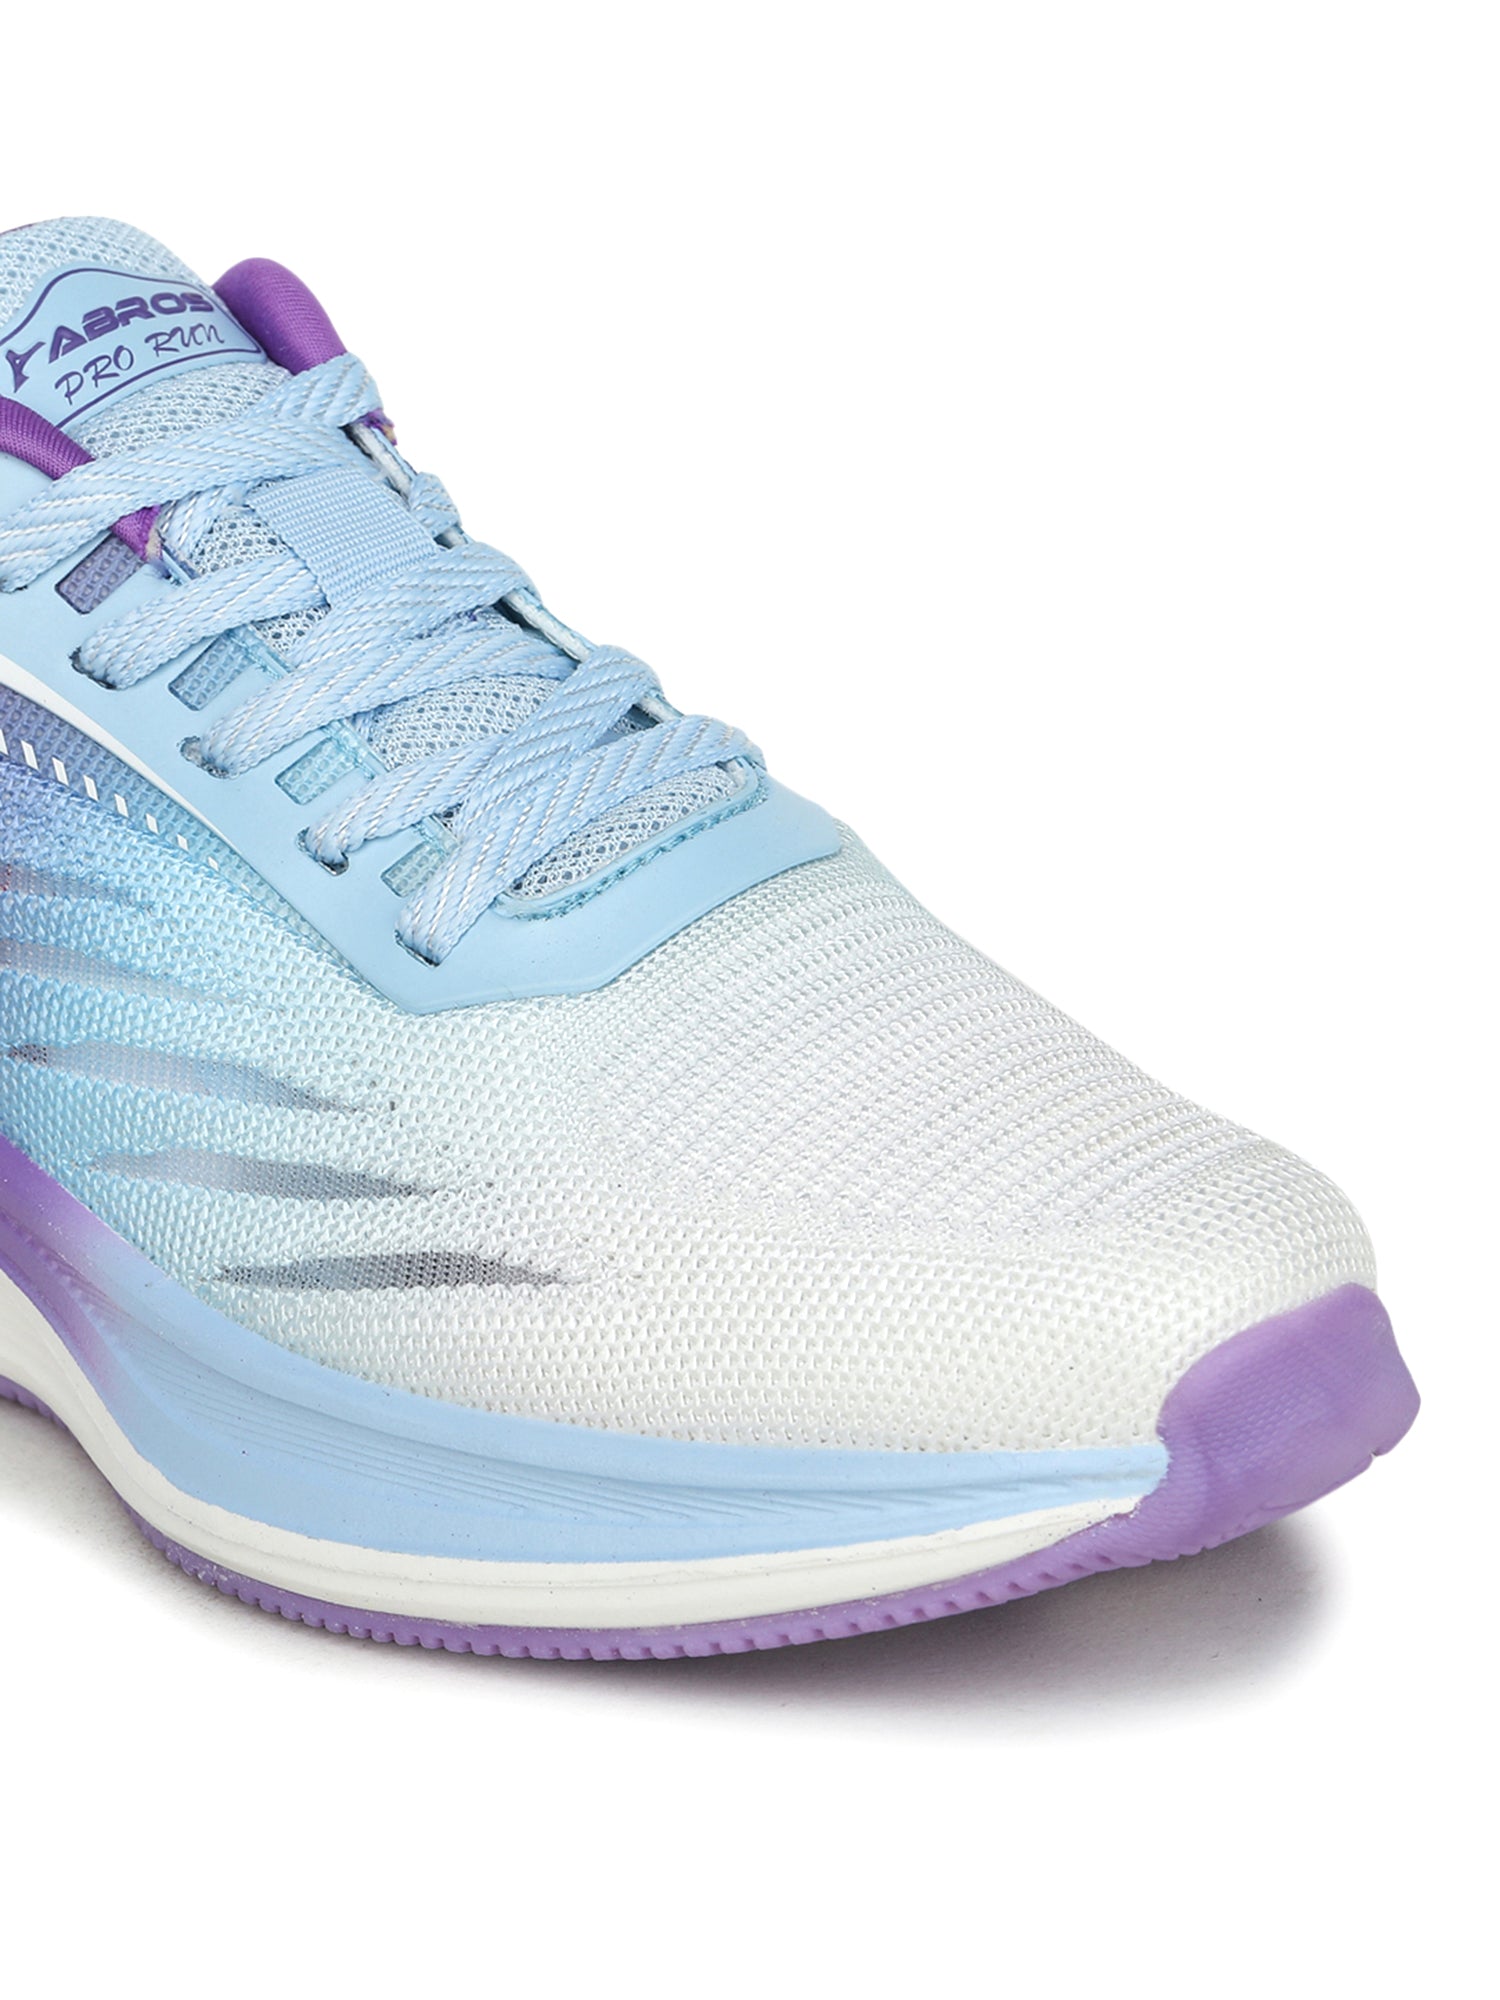 ABROS SWAN SPORTS SHOES FOR WOMEN